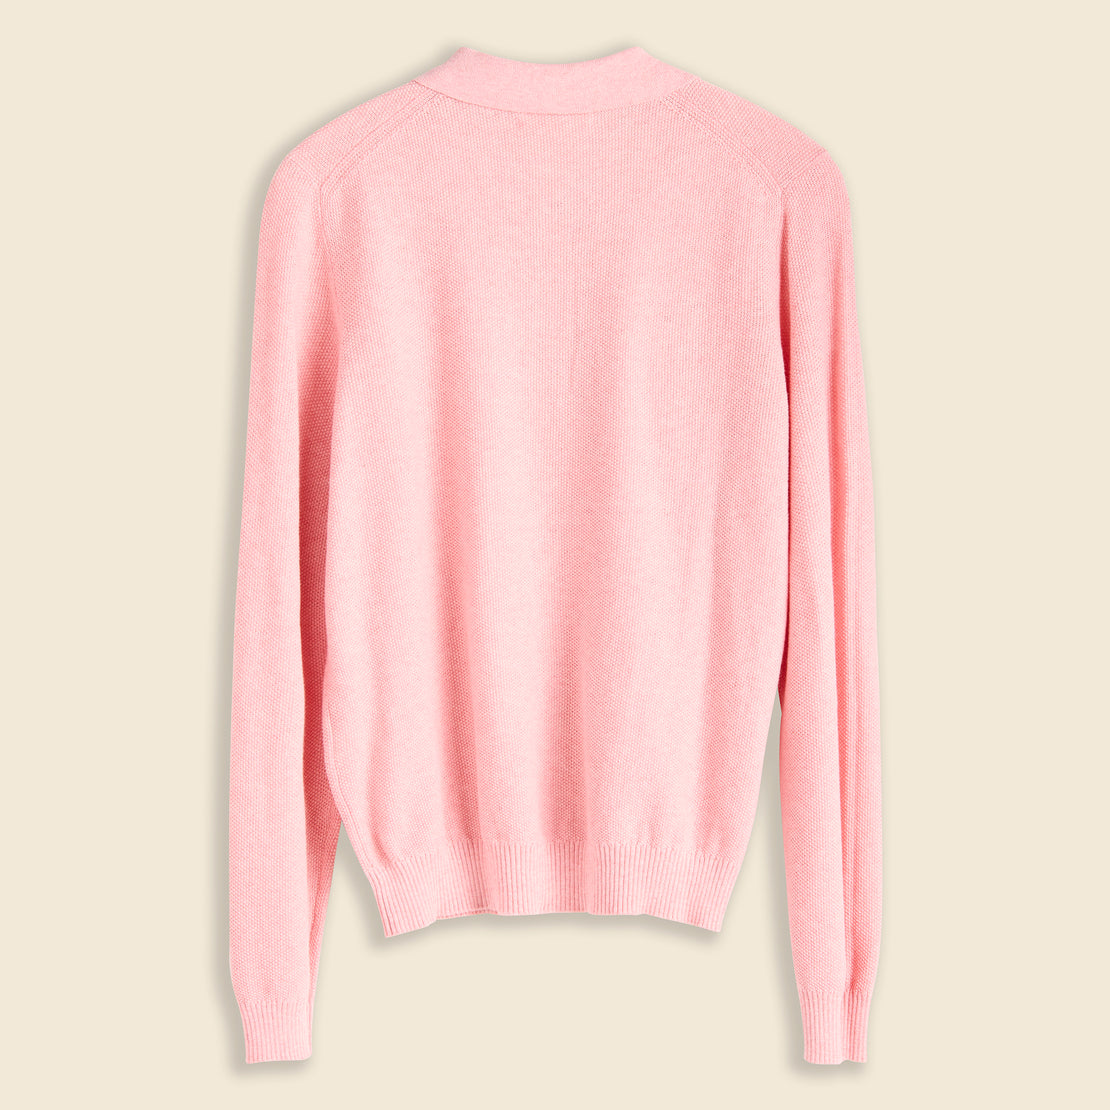 Alice Polo Sweater - Powder Pinky - Alex Mill - STAG Provisions - W - Tops - Sweater